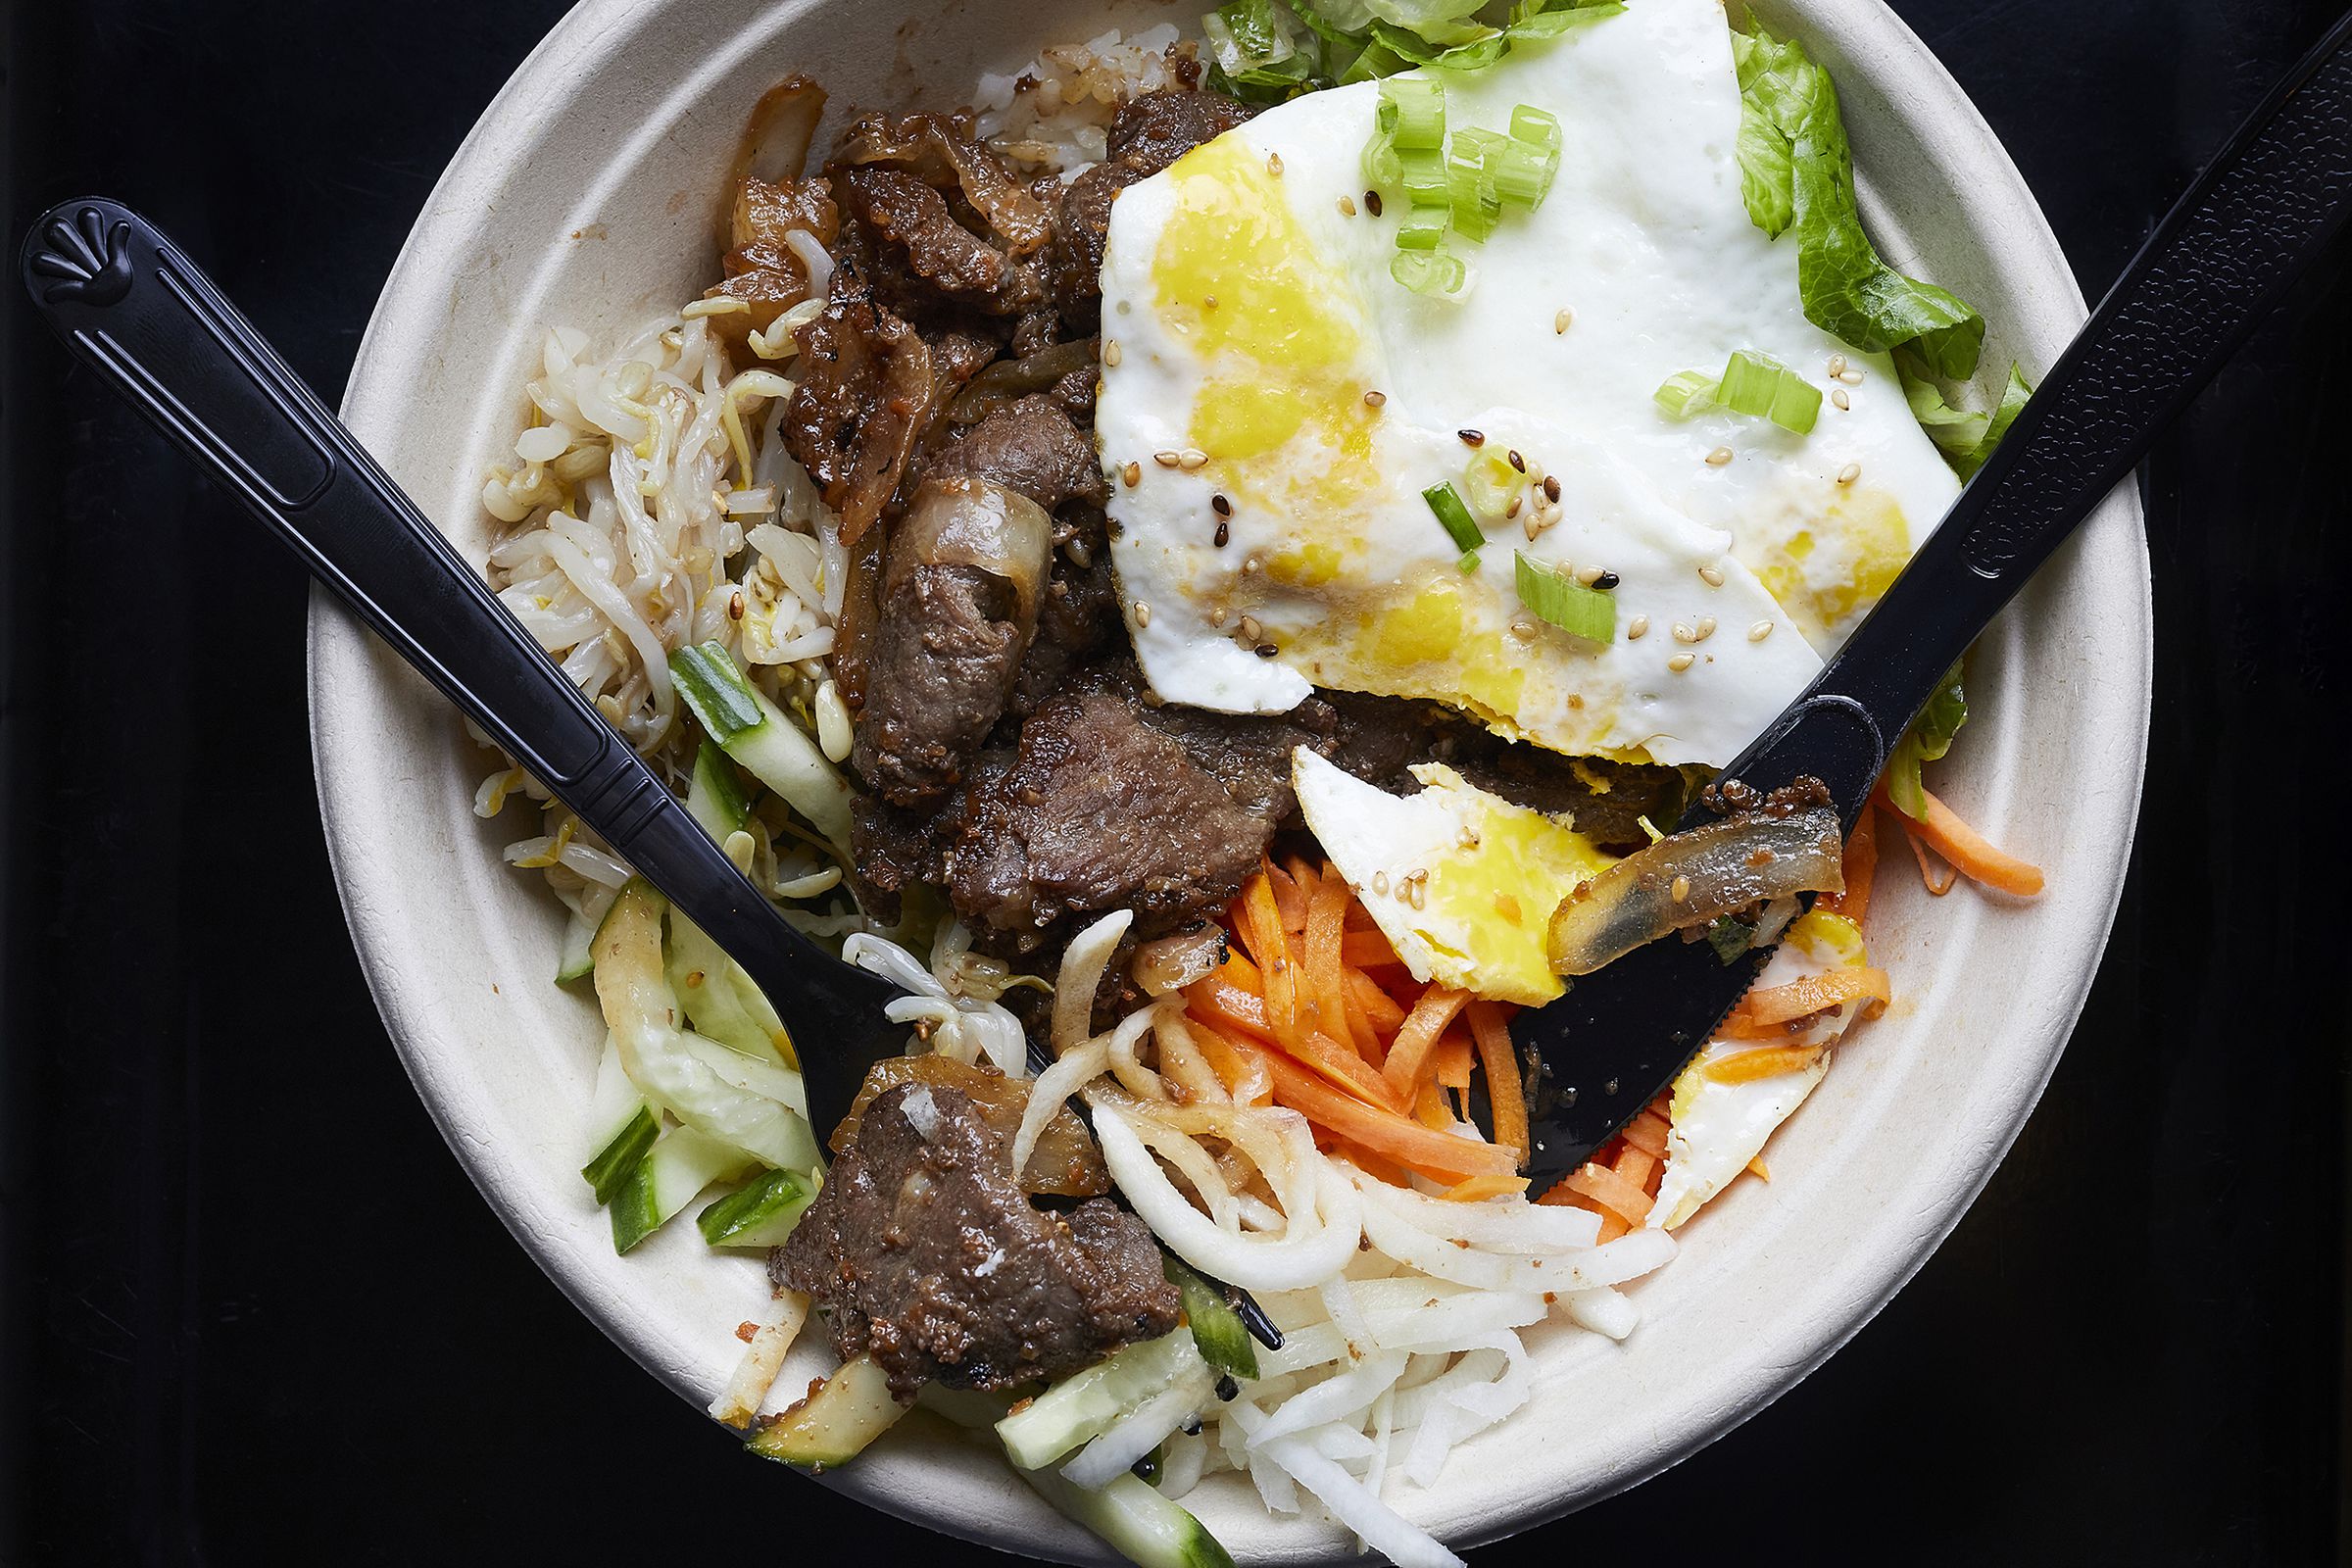 A fried egg and slices of beef lie on a bed of rice and vegetables in a bowl along with a plastic knife and fork.